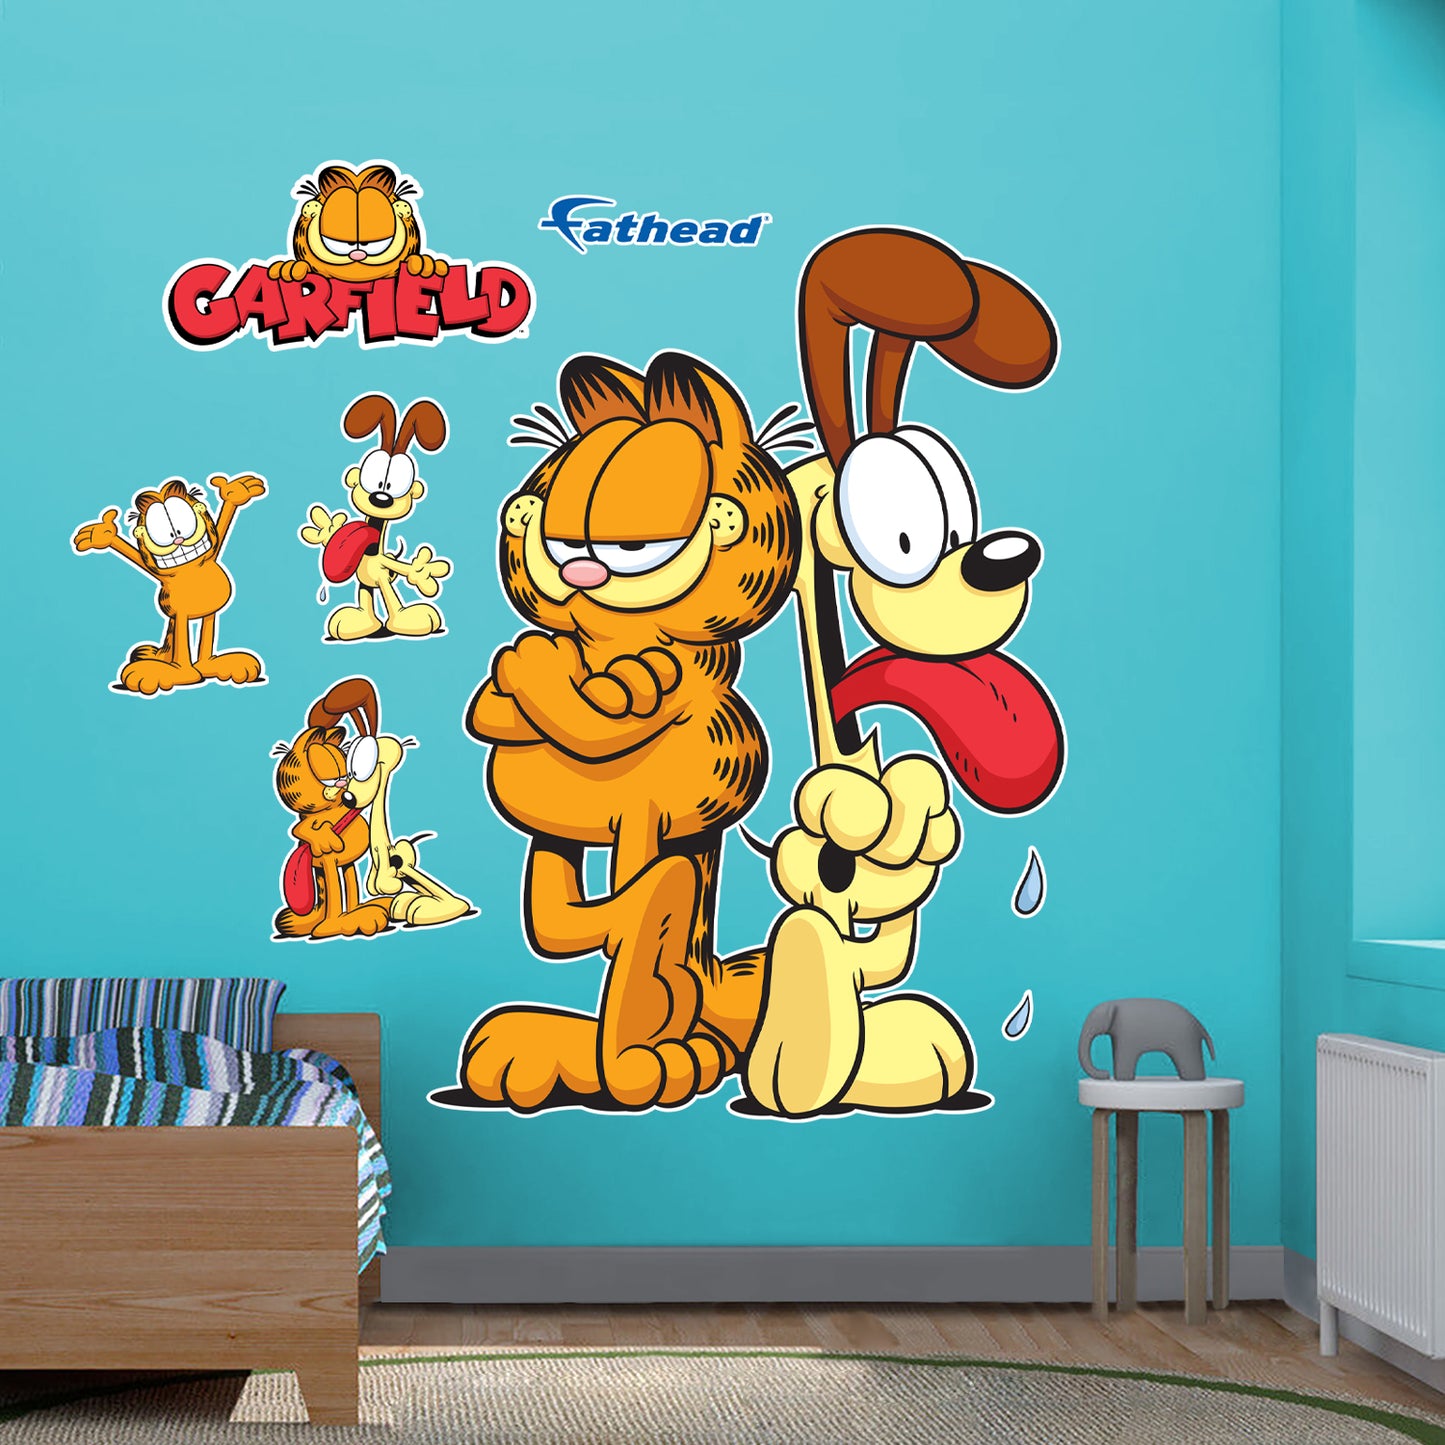 Garfield: Garfield & Odie RealBigs        - Officially Licensed Nickelodeon Removable     Adhesive Decal